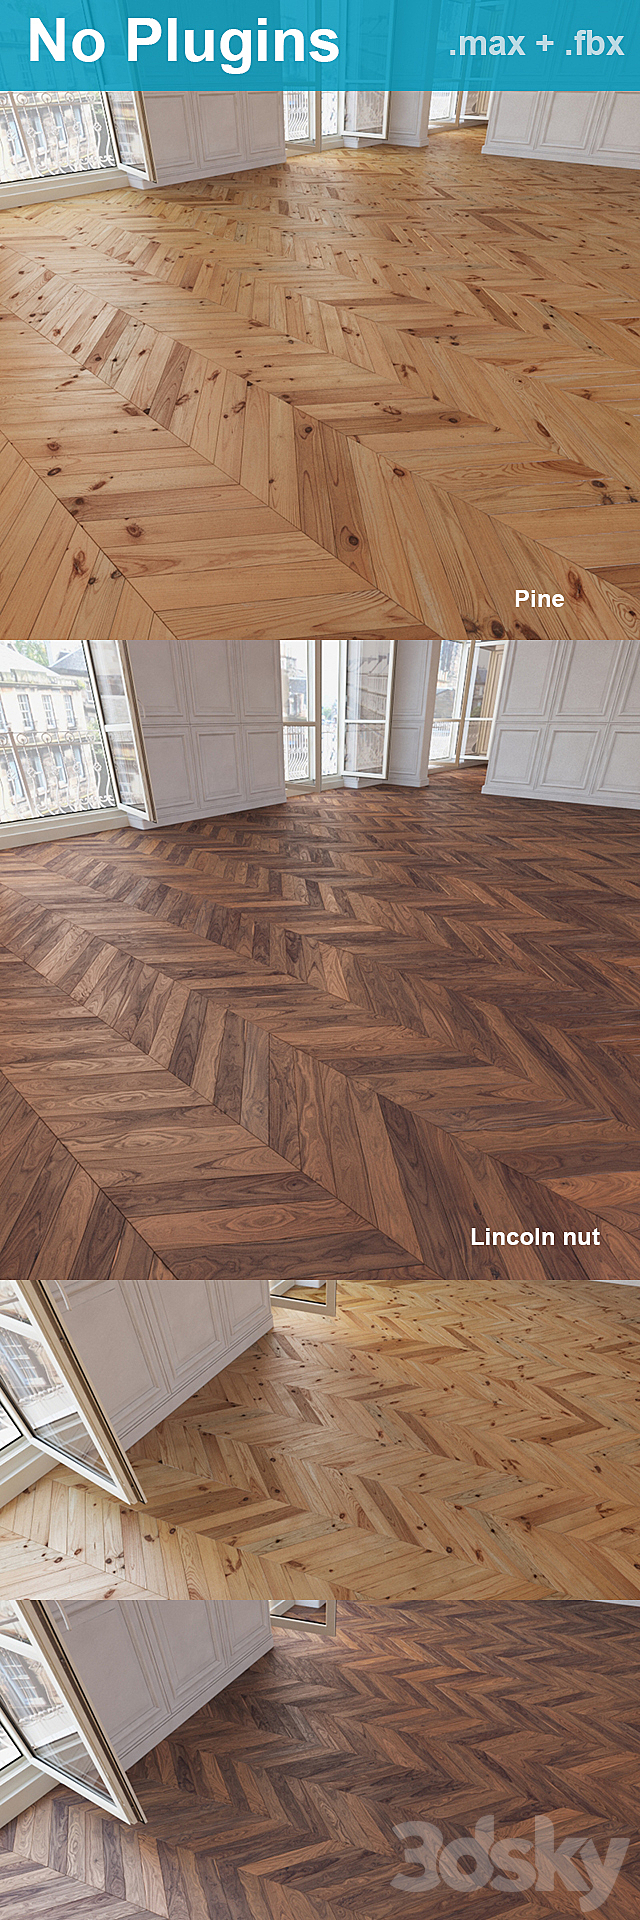 Herringbone parquet 33 (2 species. without the use of plug-ins) 3DSMax File - thumbnail 2